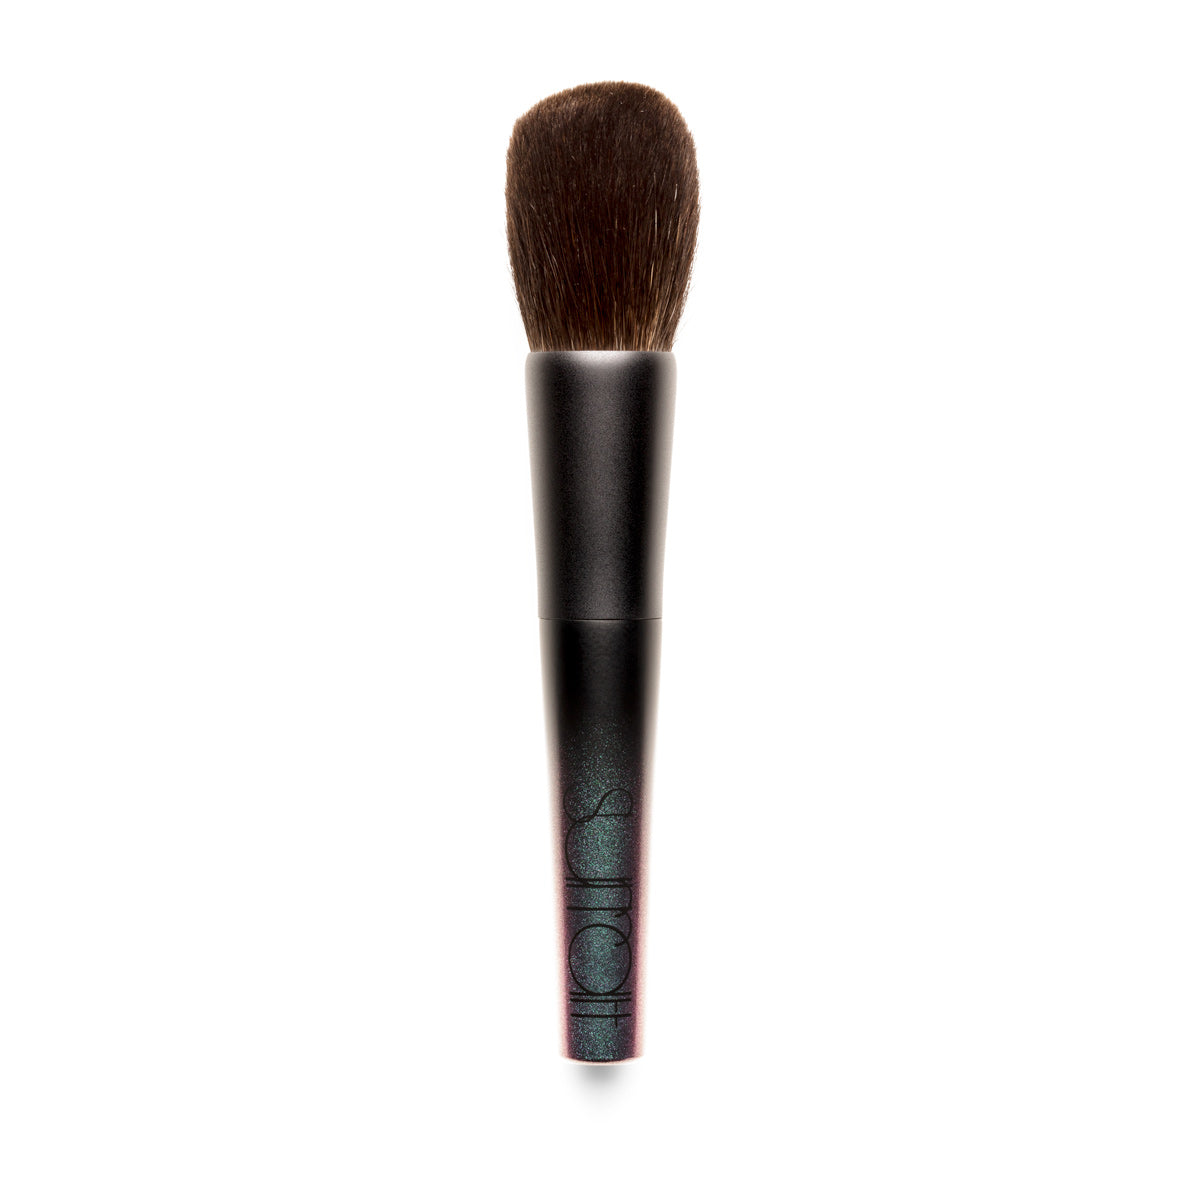 ultra-soft natural hair makeup brush for face and powder